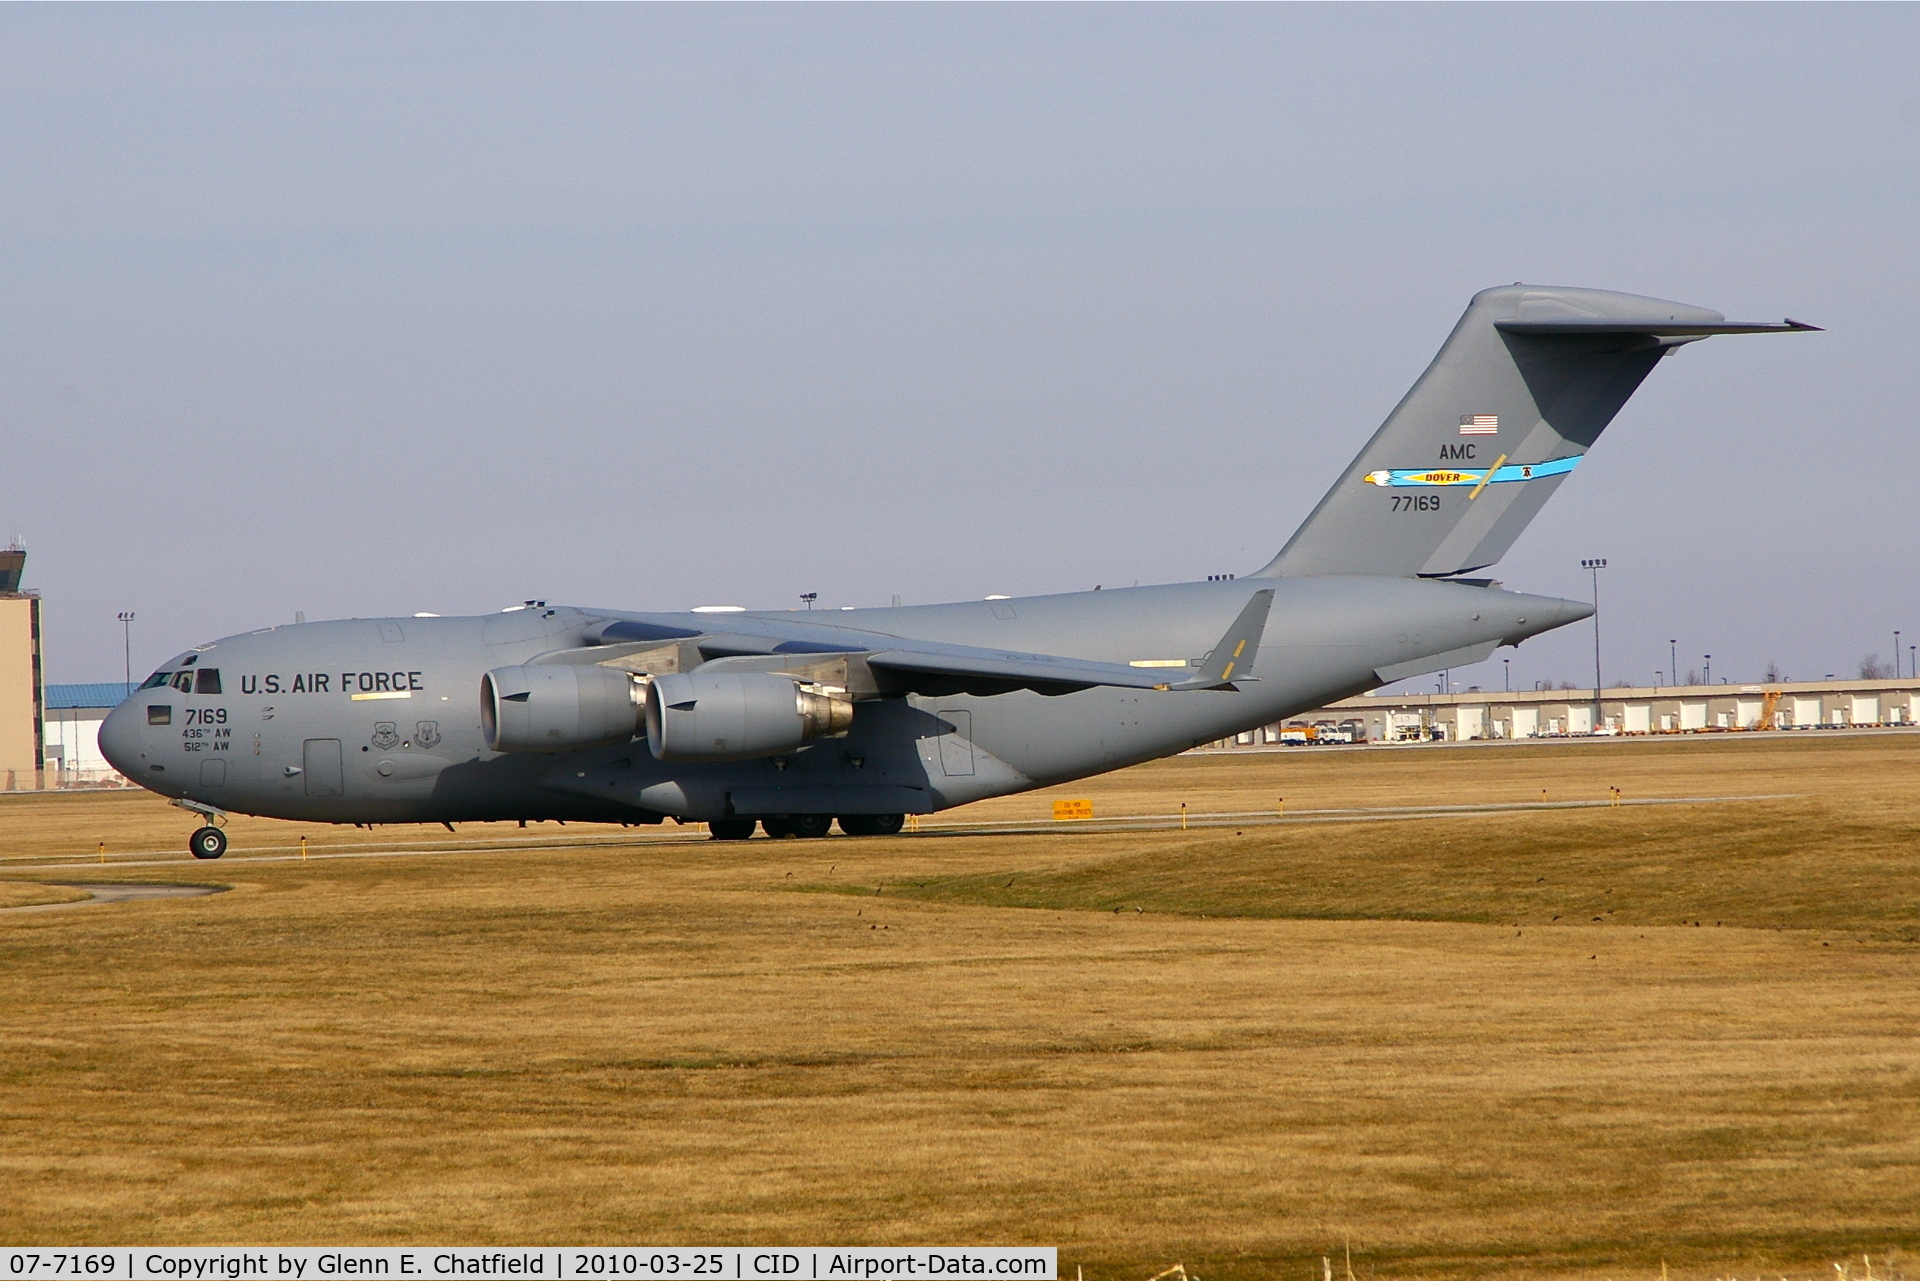 07-7169, 2007 Boeing C-17A Globemaster III C/N F-179/P-169, Presidential support aircraft parked on taxiway C